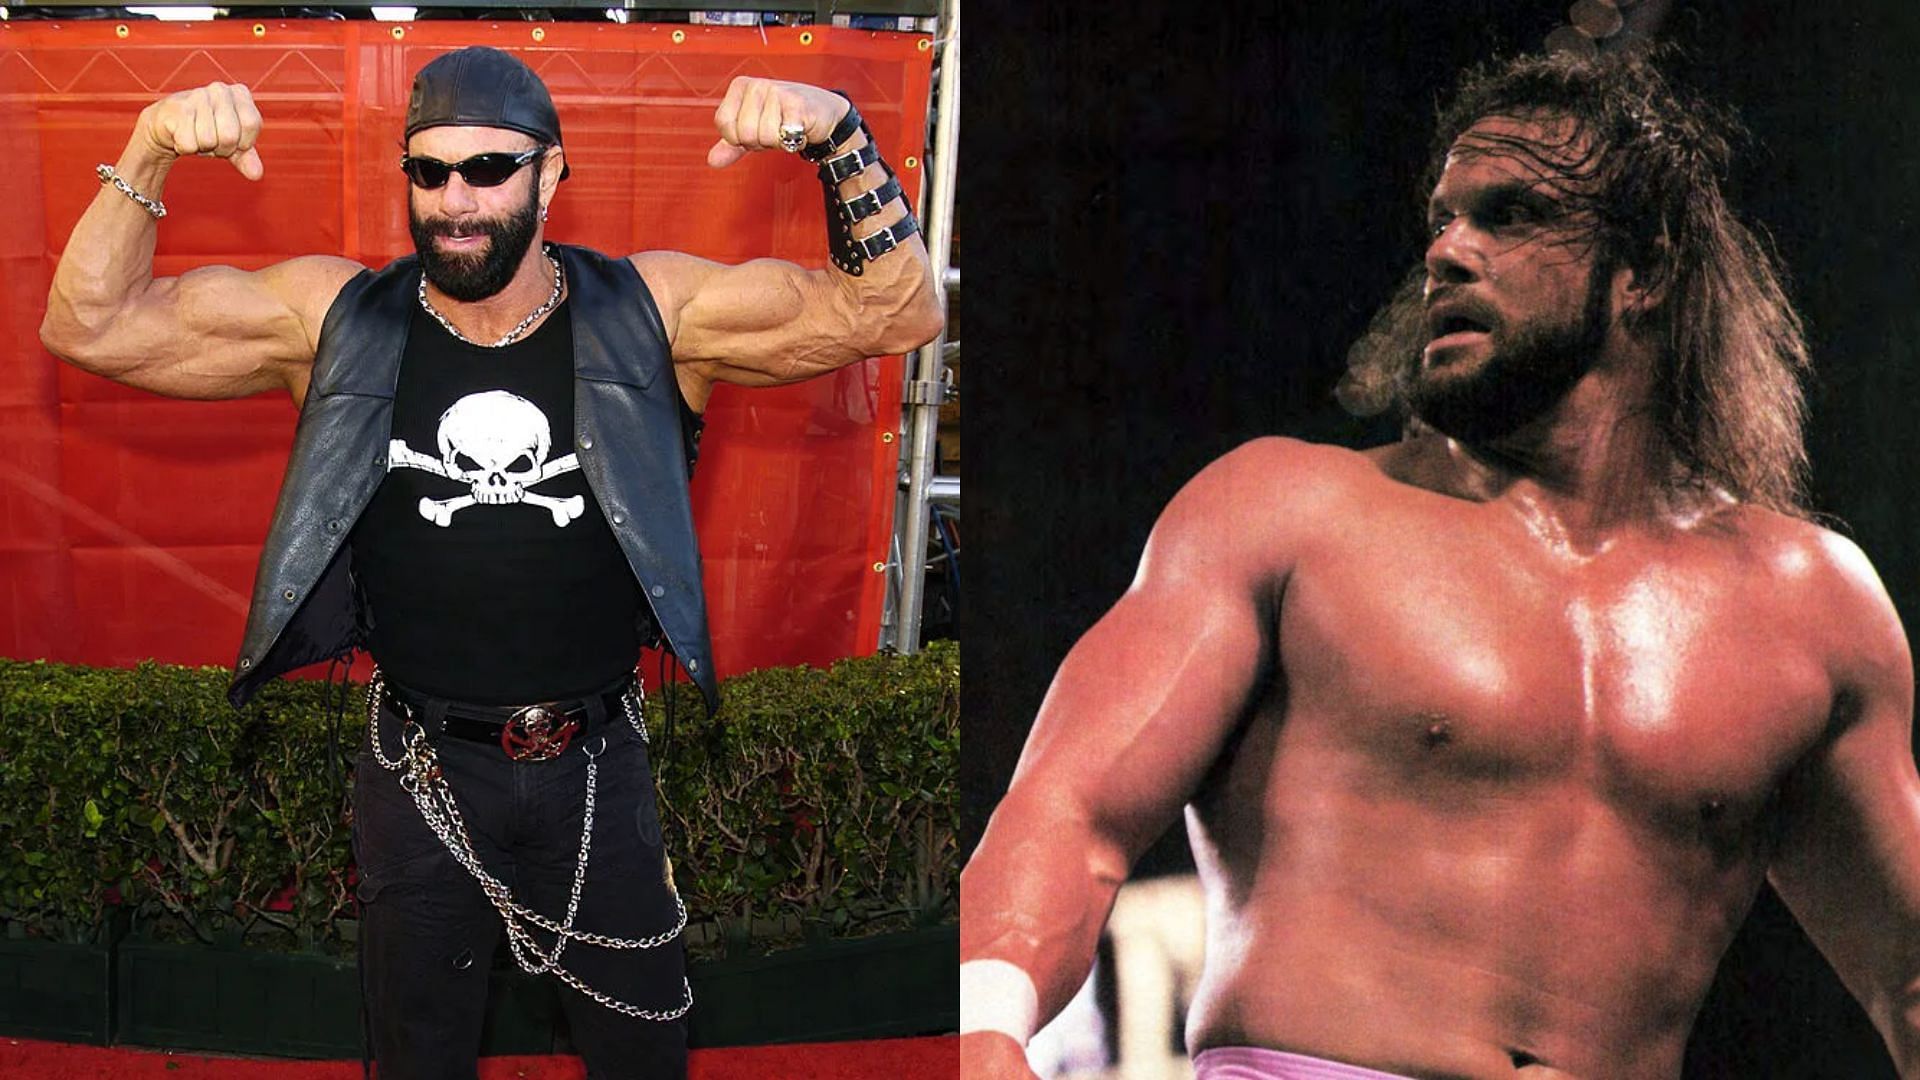 Randy Savage was inducted into the Hall of Fame posthumously